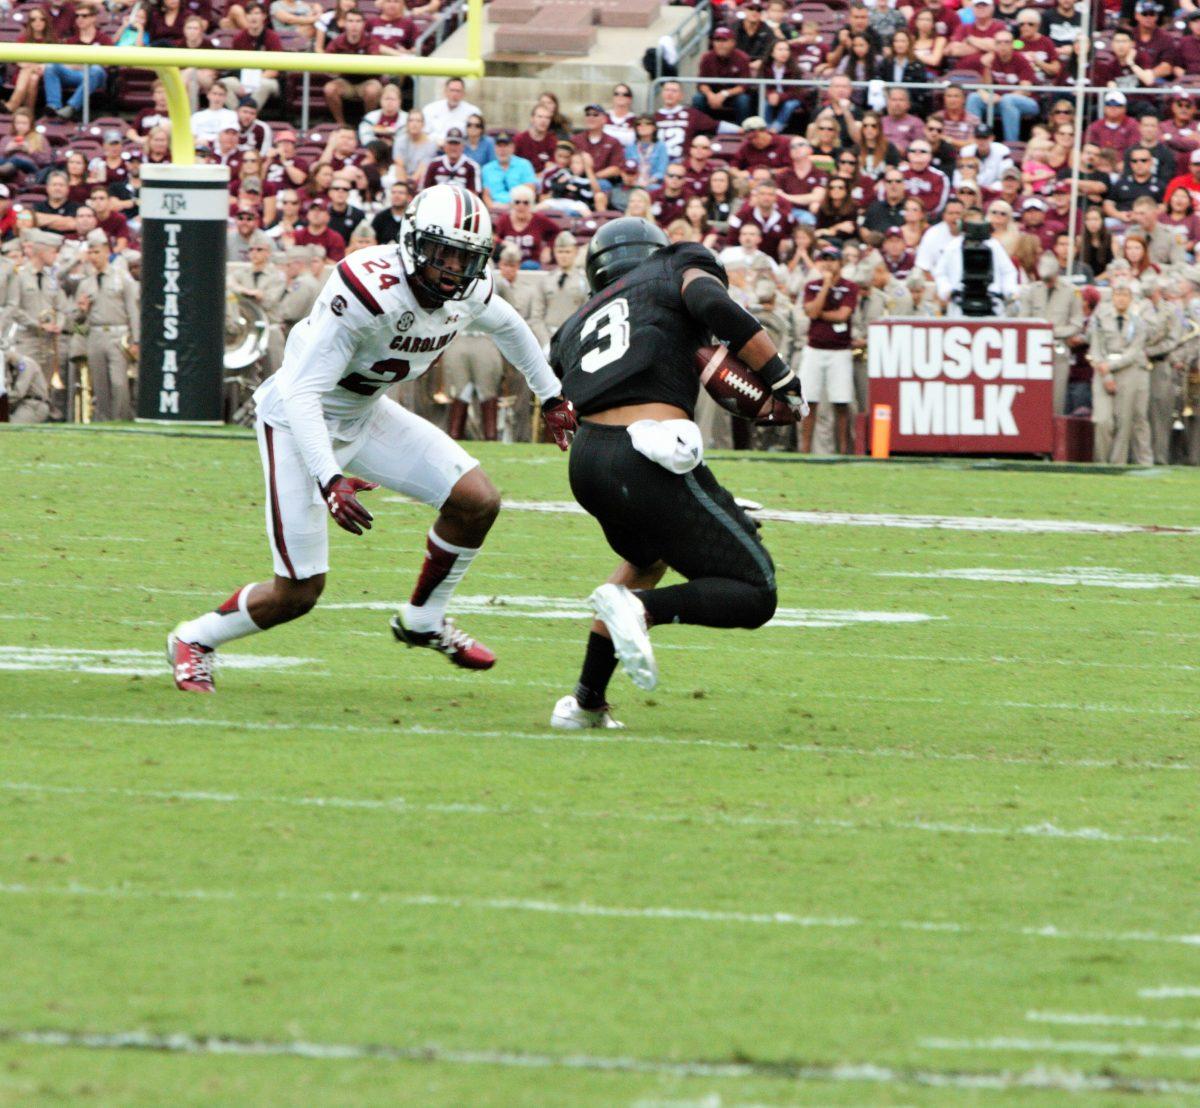 Freshman wide receiver Christian Kirk attempts to get past South Carolina safety D.J. Smith.